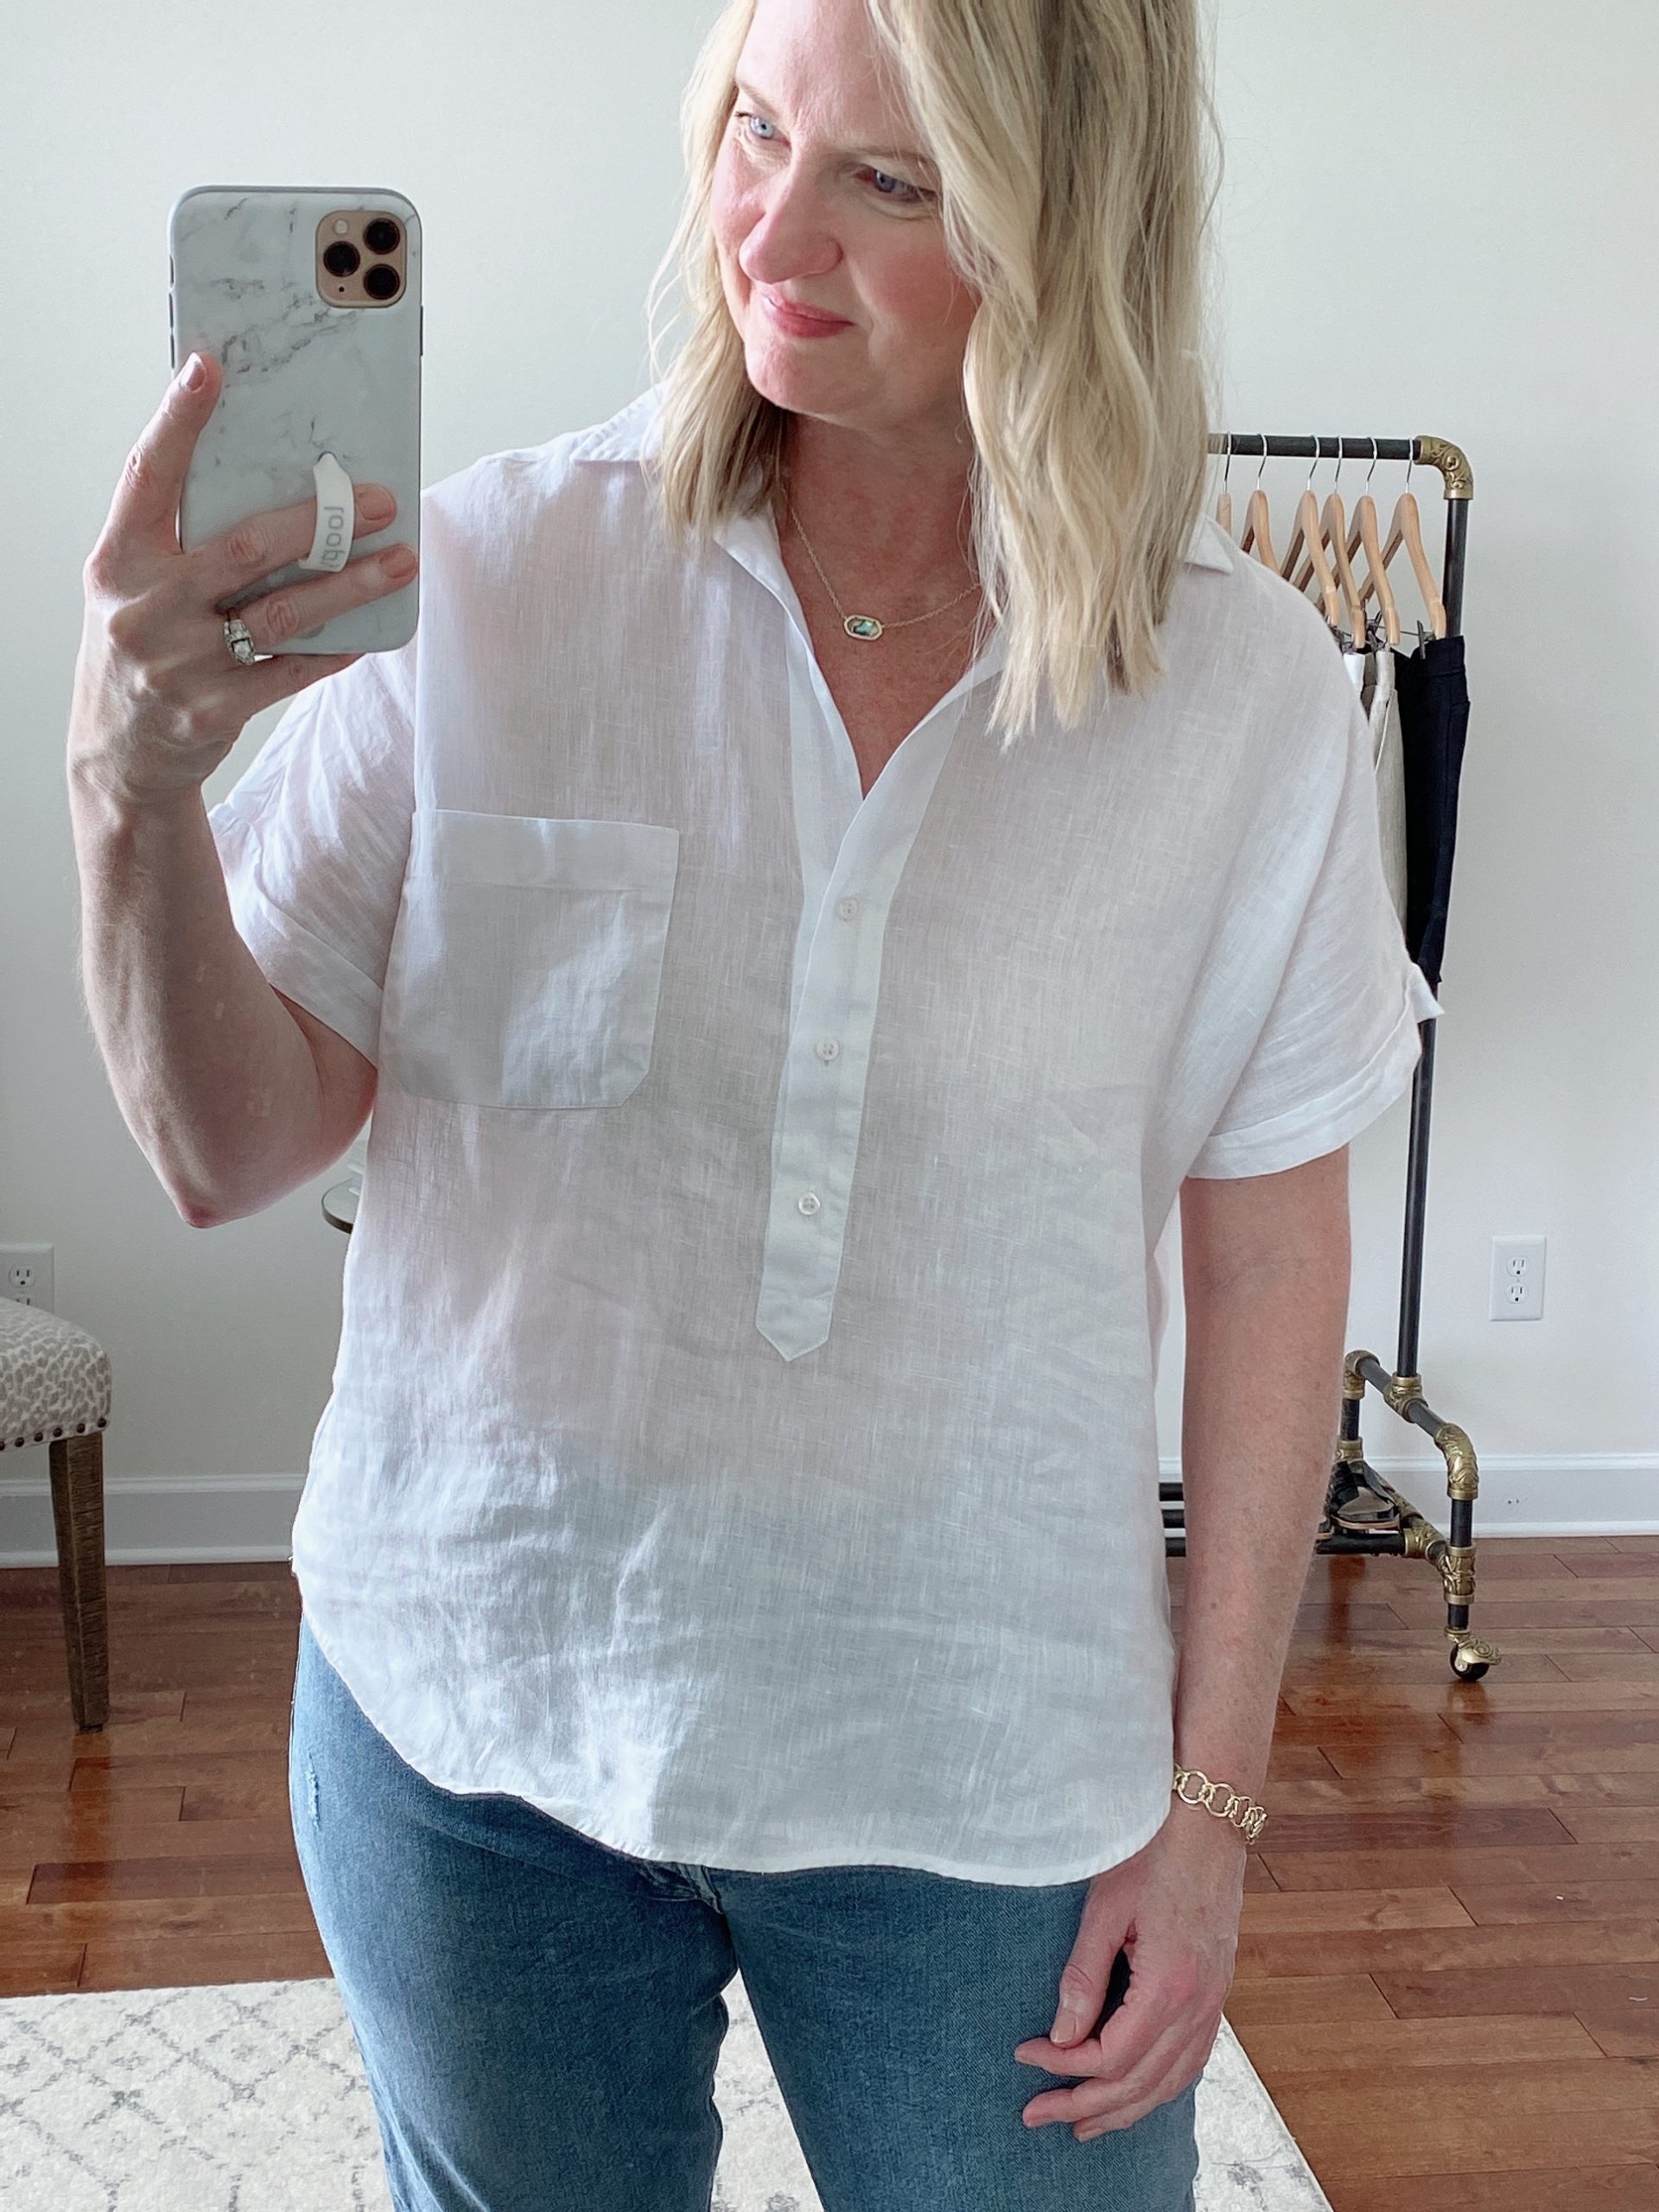 Outfits Diary: What I Wore July 2021 - Classy Yet Trendy